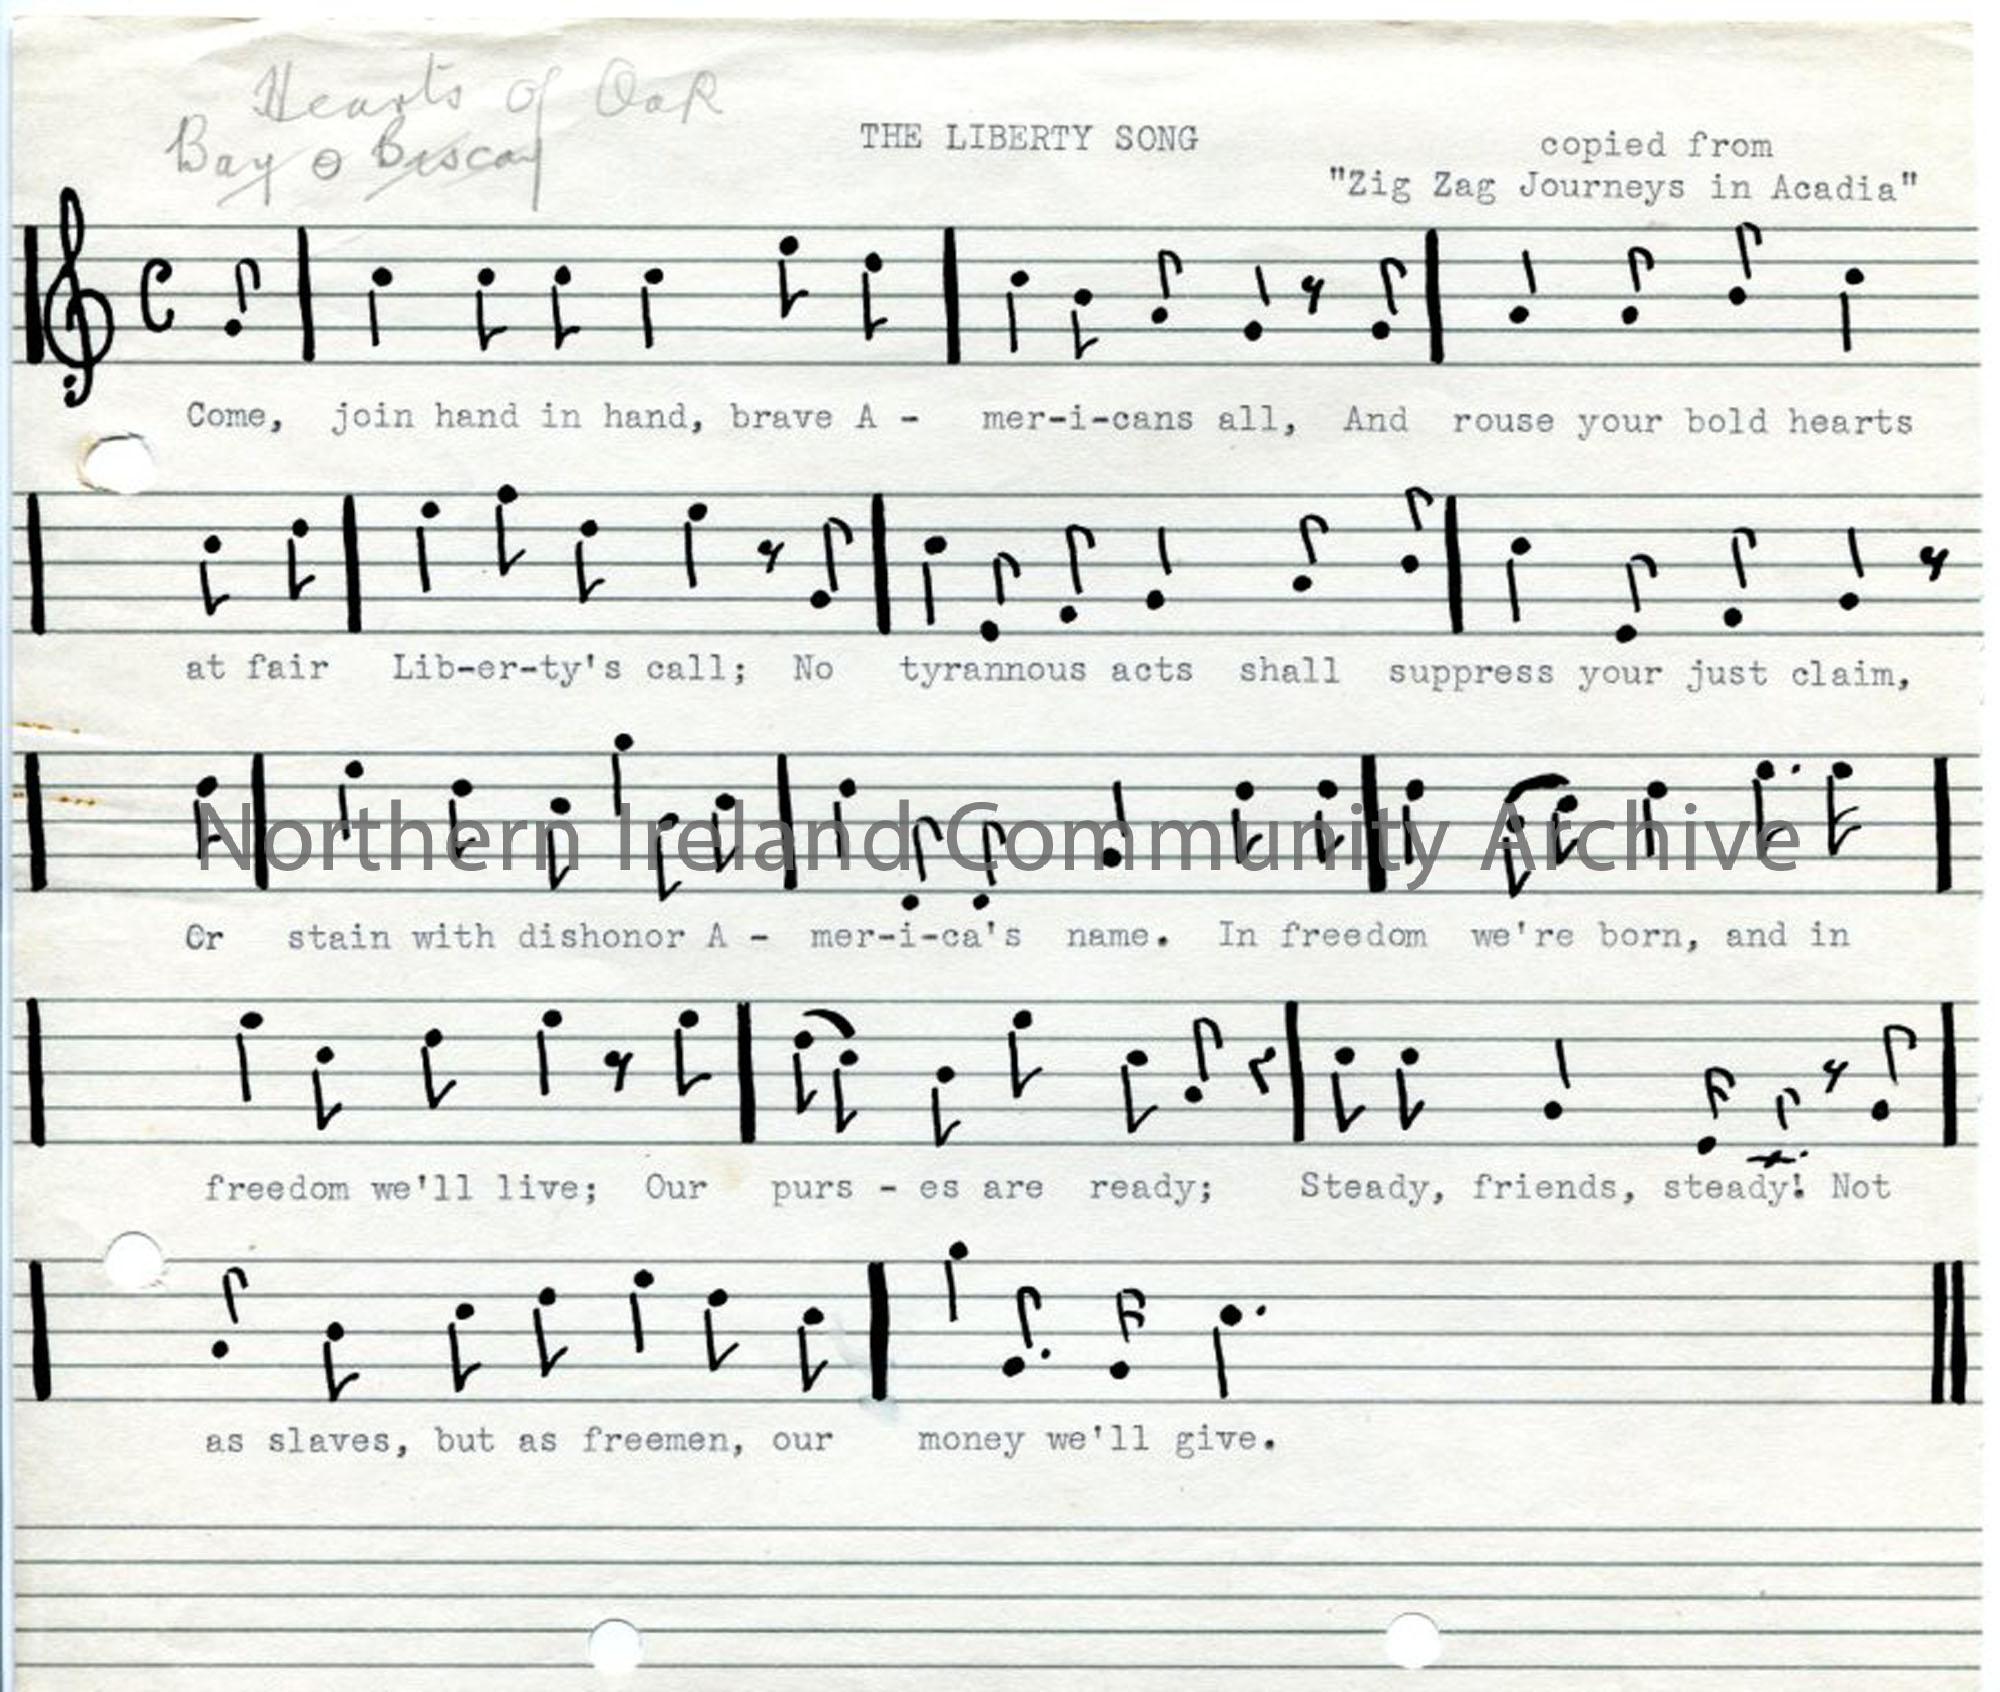 Hand drawn staff notation and typed words to a version of ‘The Liberty Song’